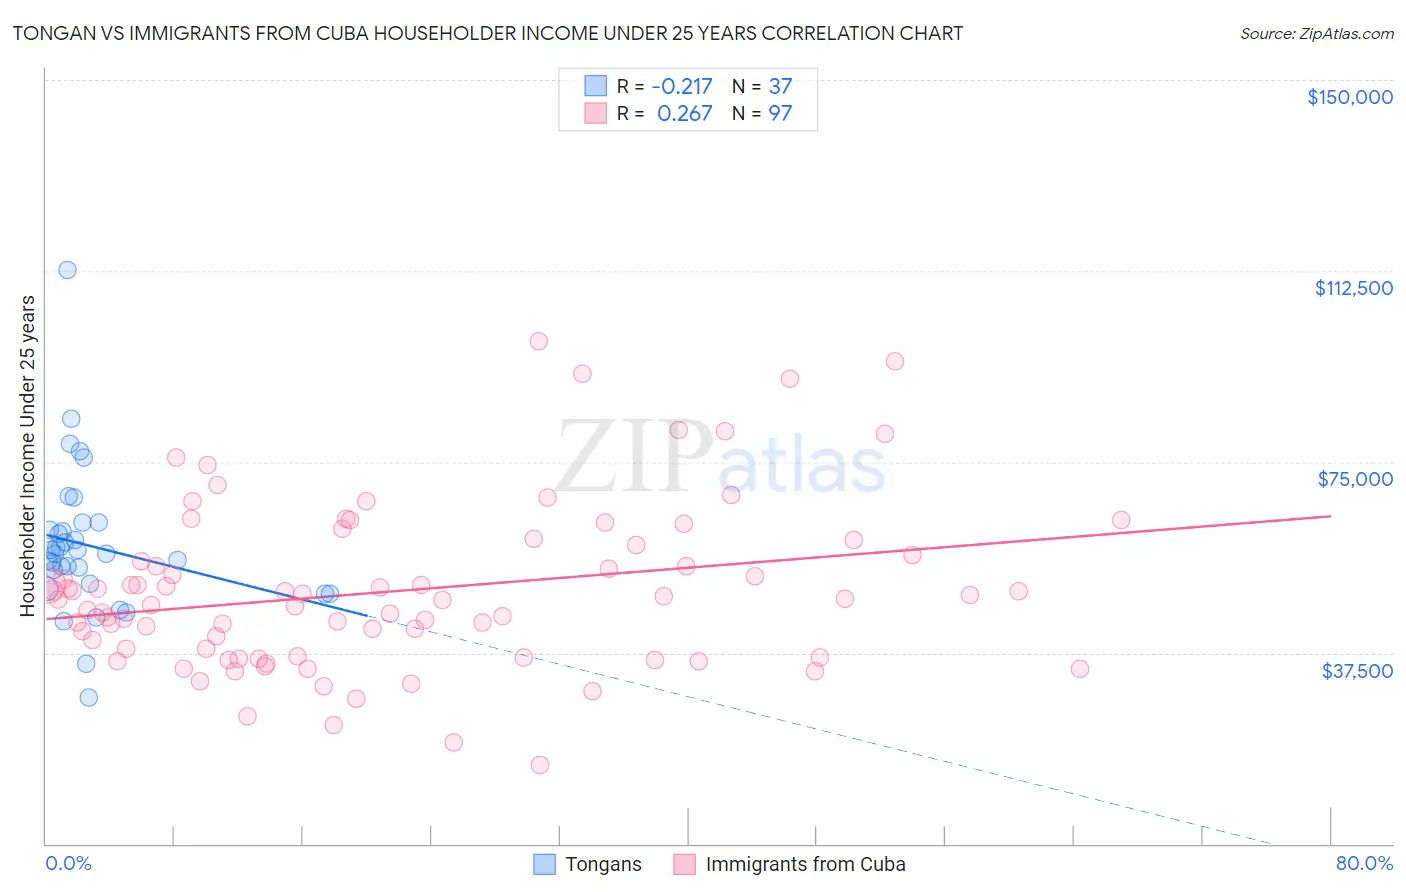 Tongan vs Immigrants from Cuba Householder Income Under 25 years